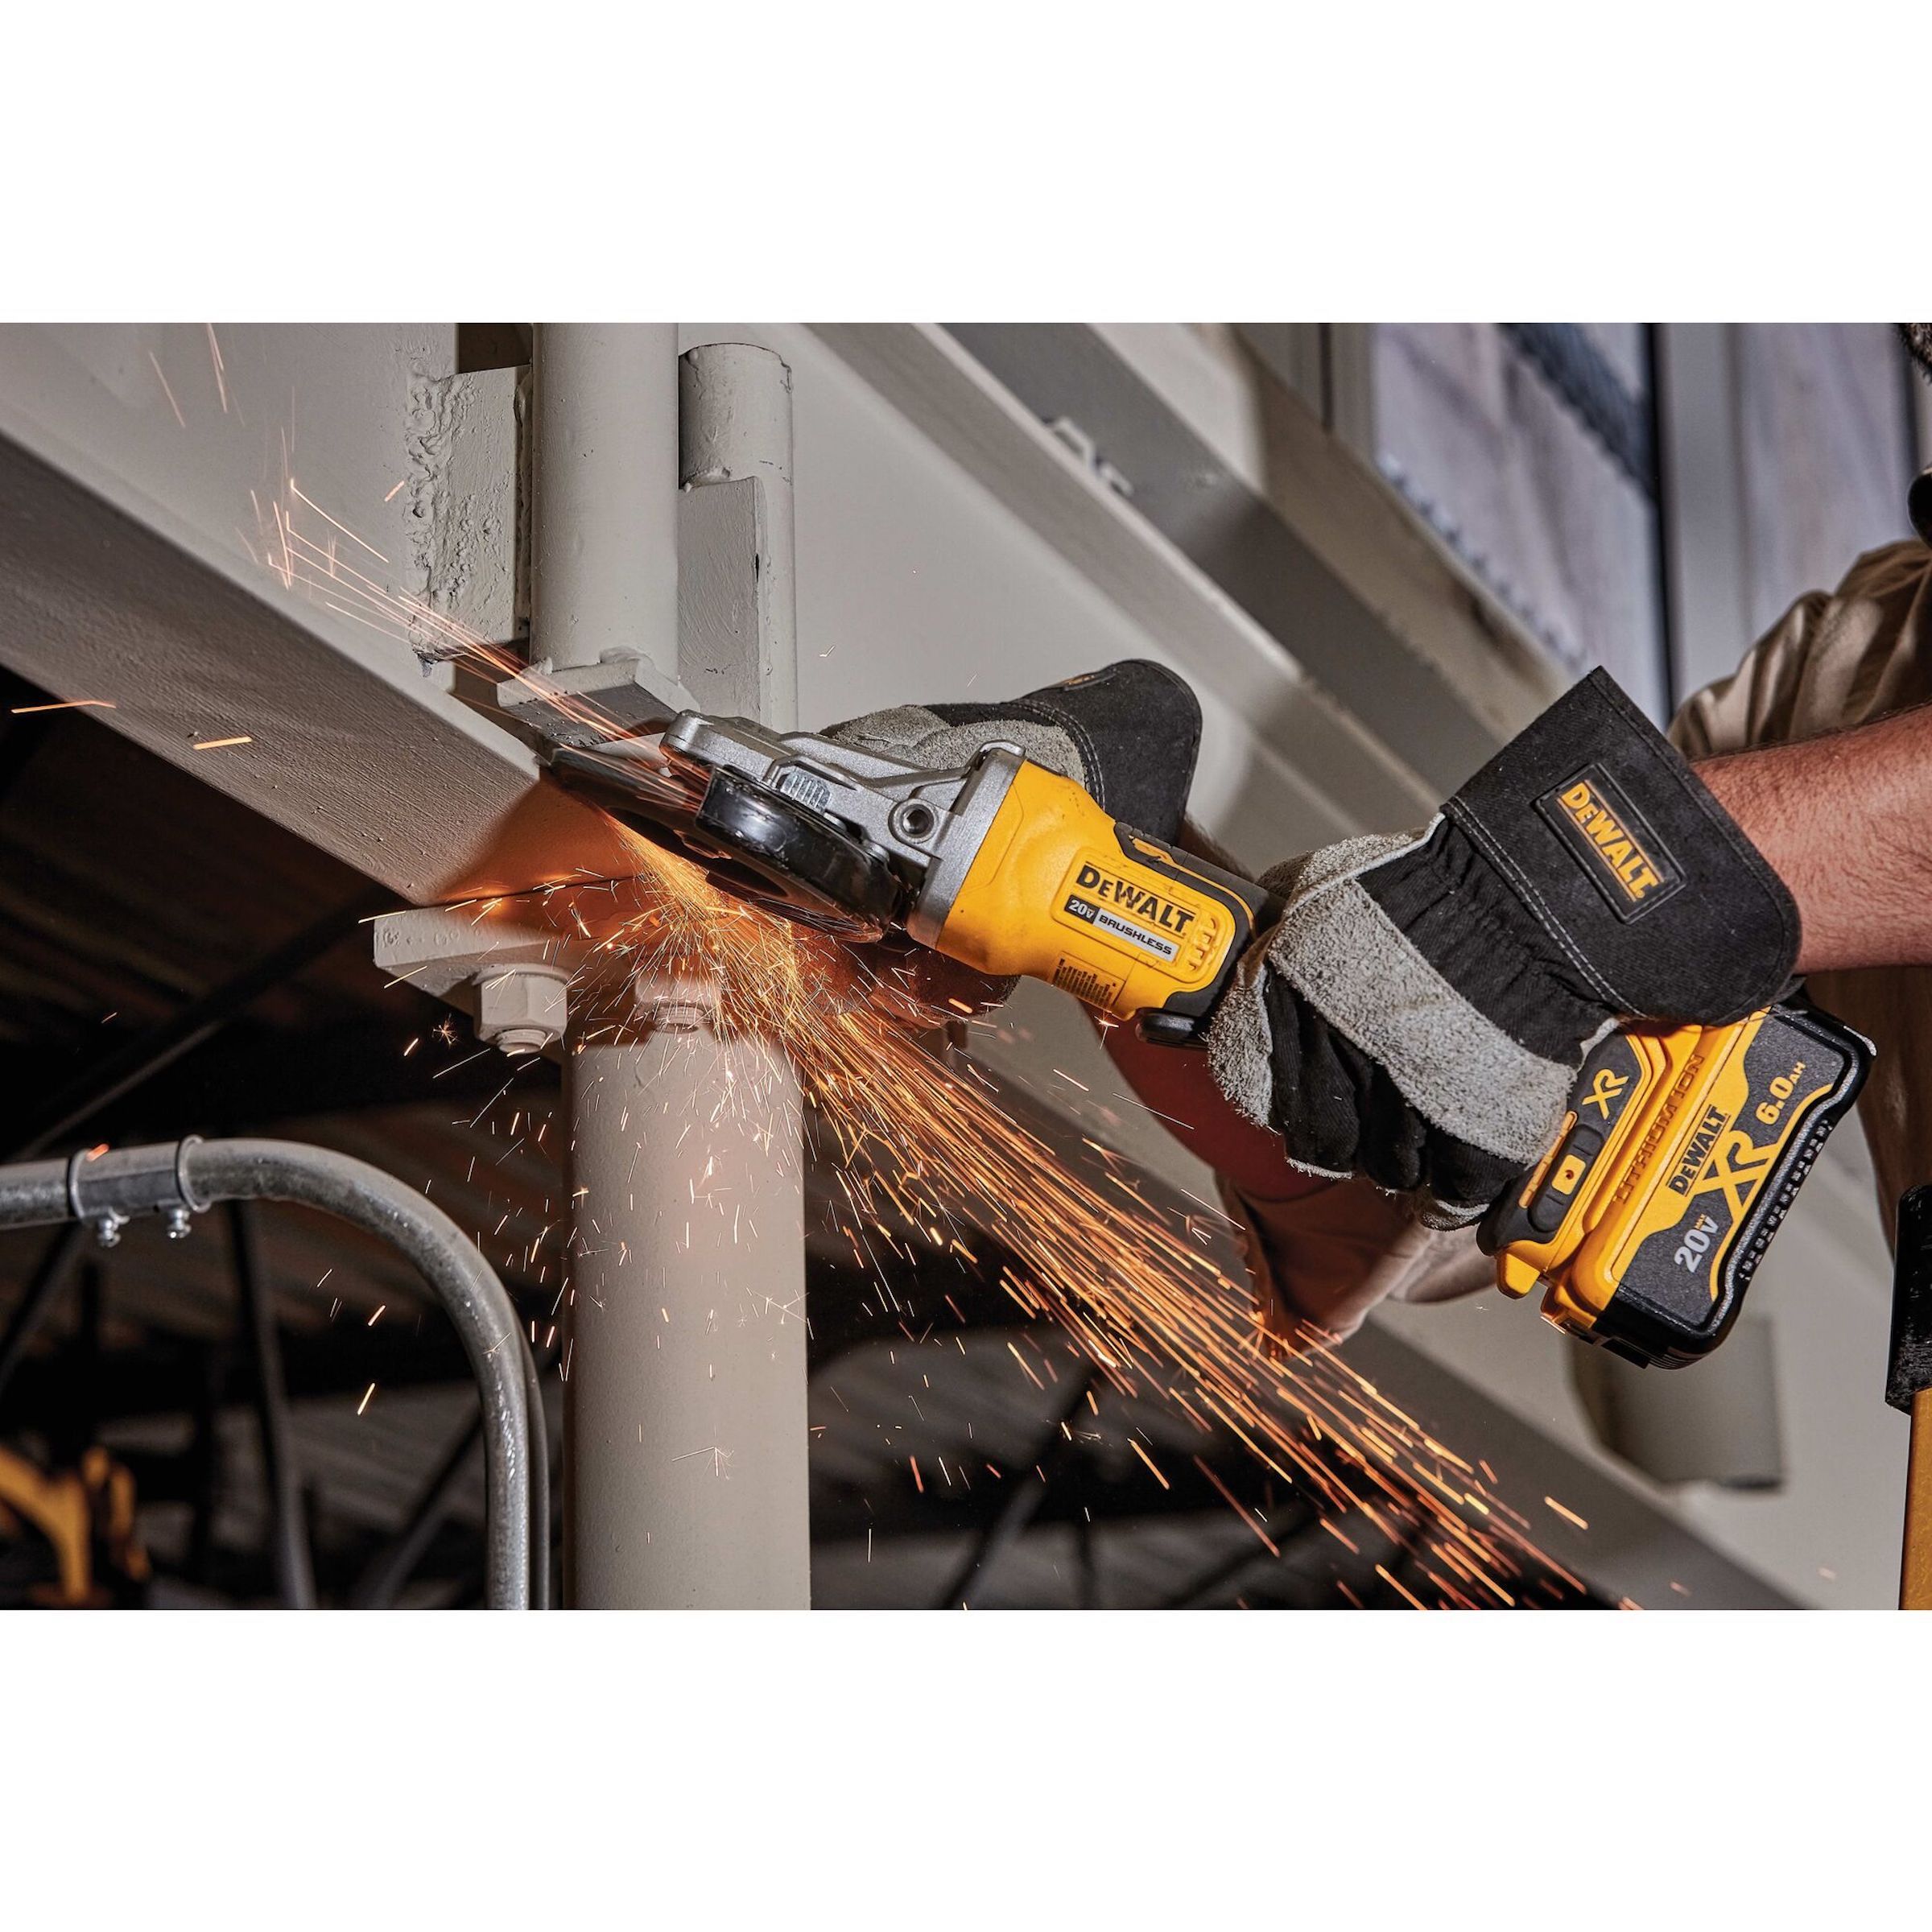 Lifestyle image showing an angle grinder in use. Lead image for the best angle grinder guide.